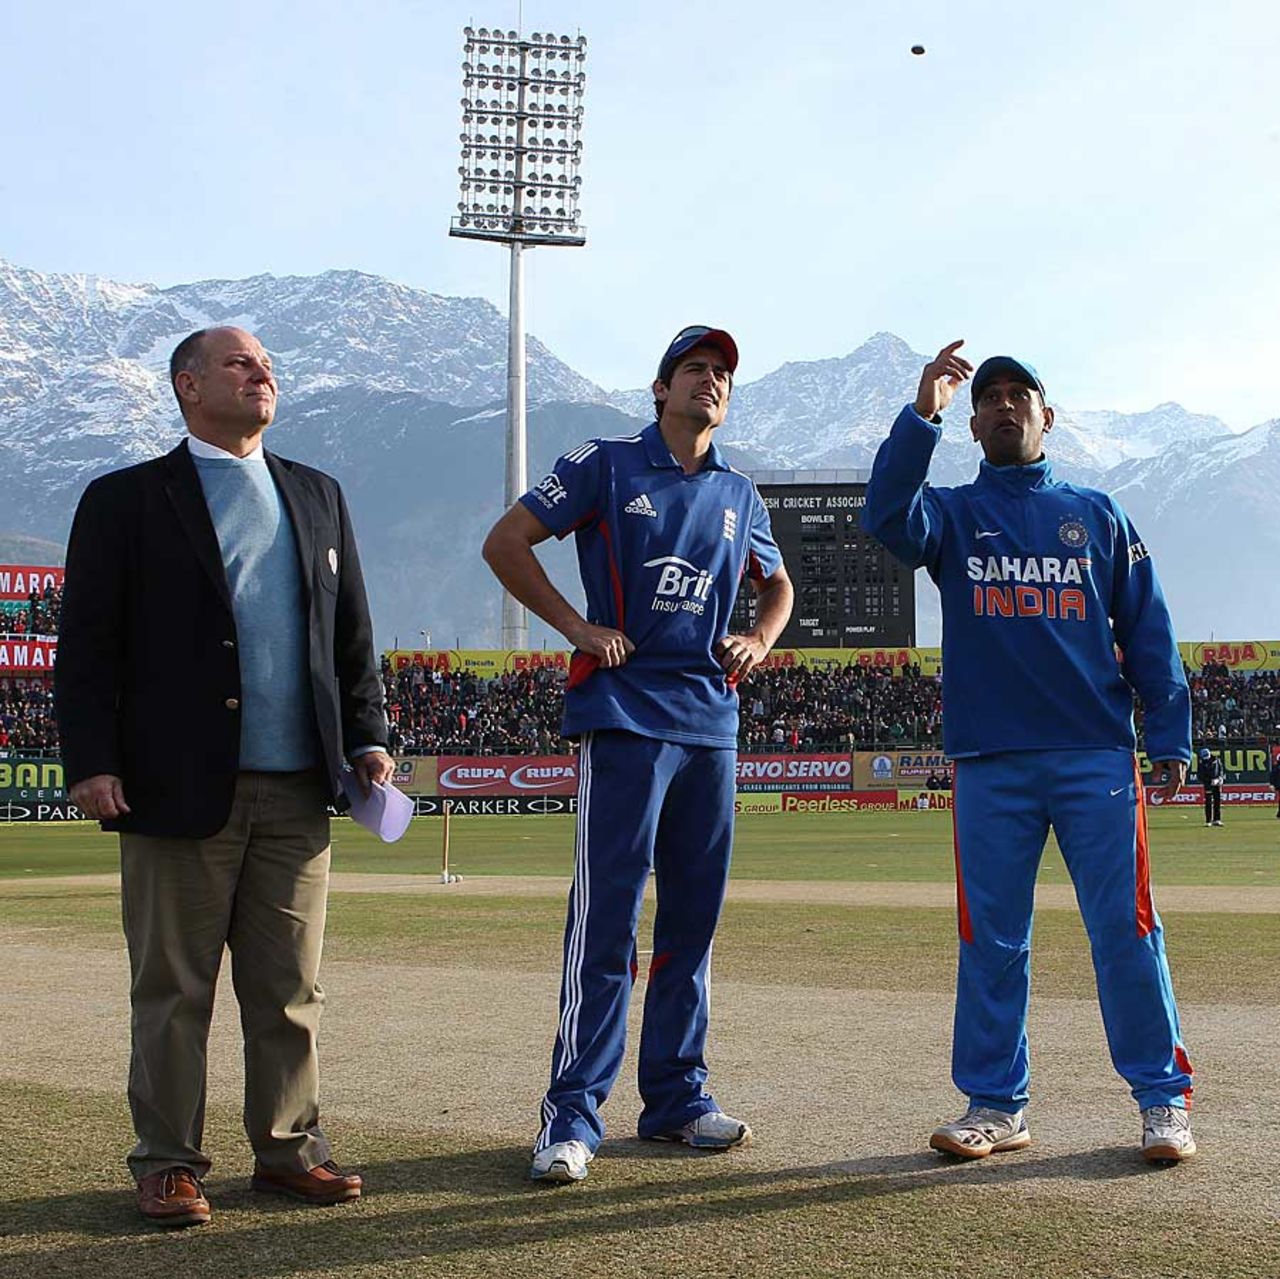 Alastair Cook and MS Dhoni at the toss against a stunning backdrop of the Himalayas, India v England, 5th ODI, Dharamsala, January 27, 2013